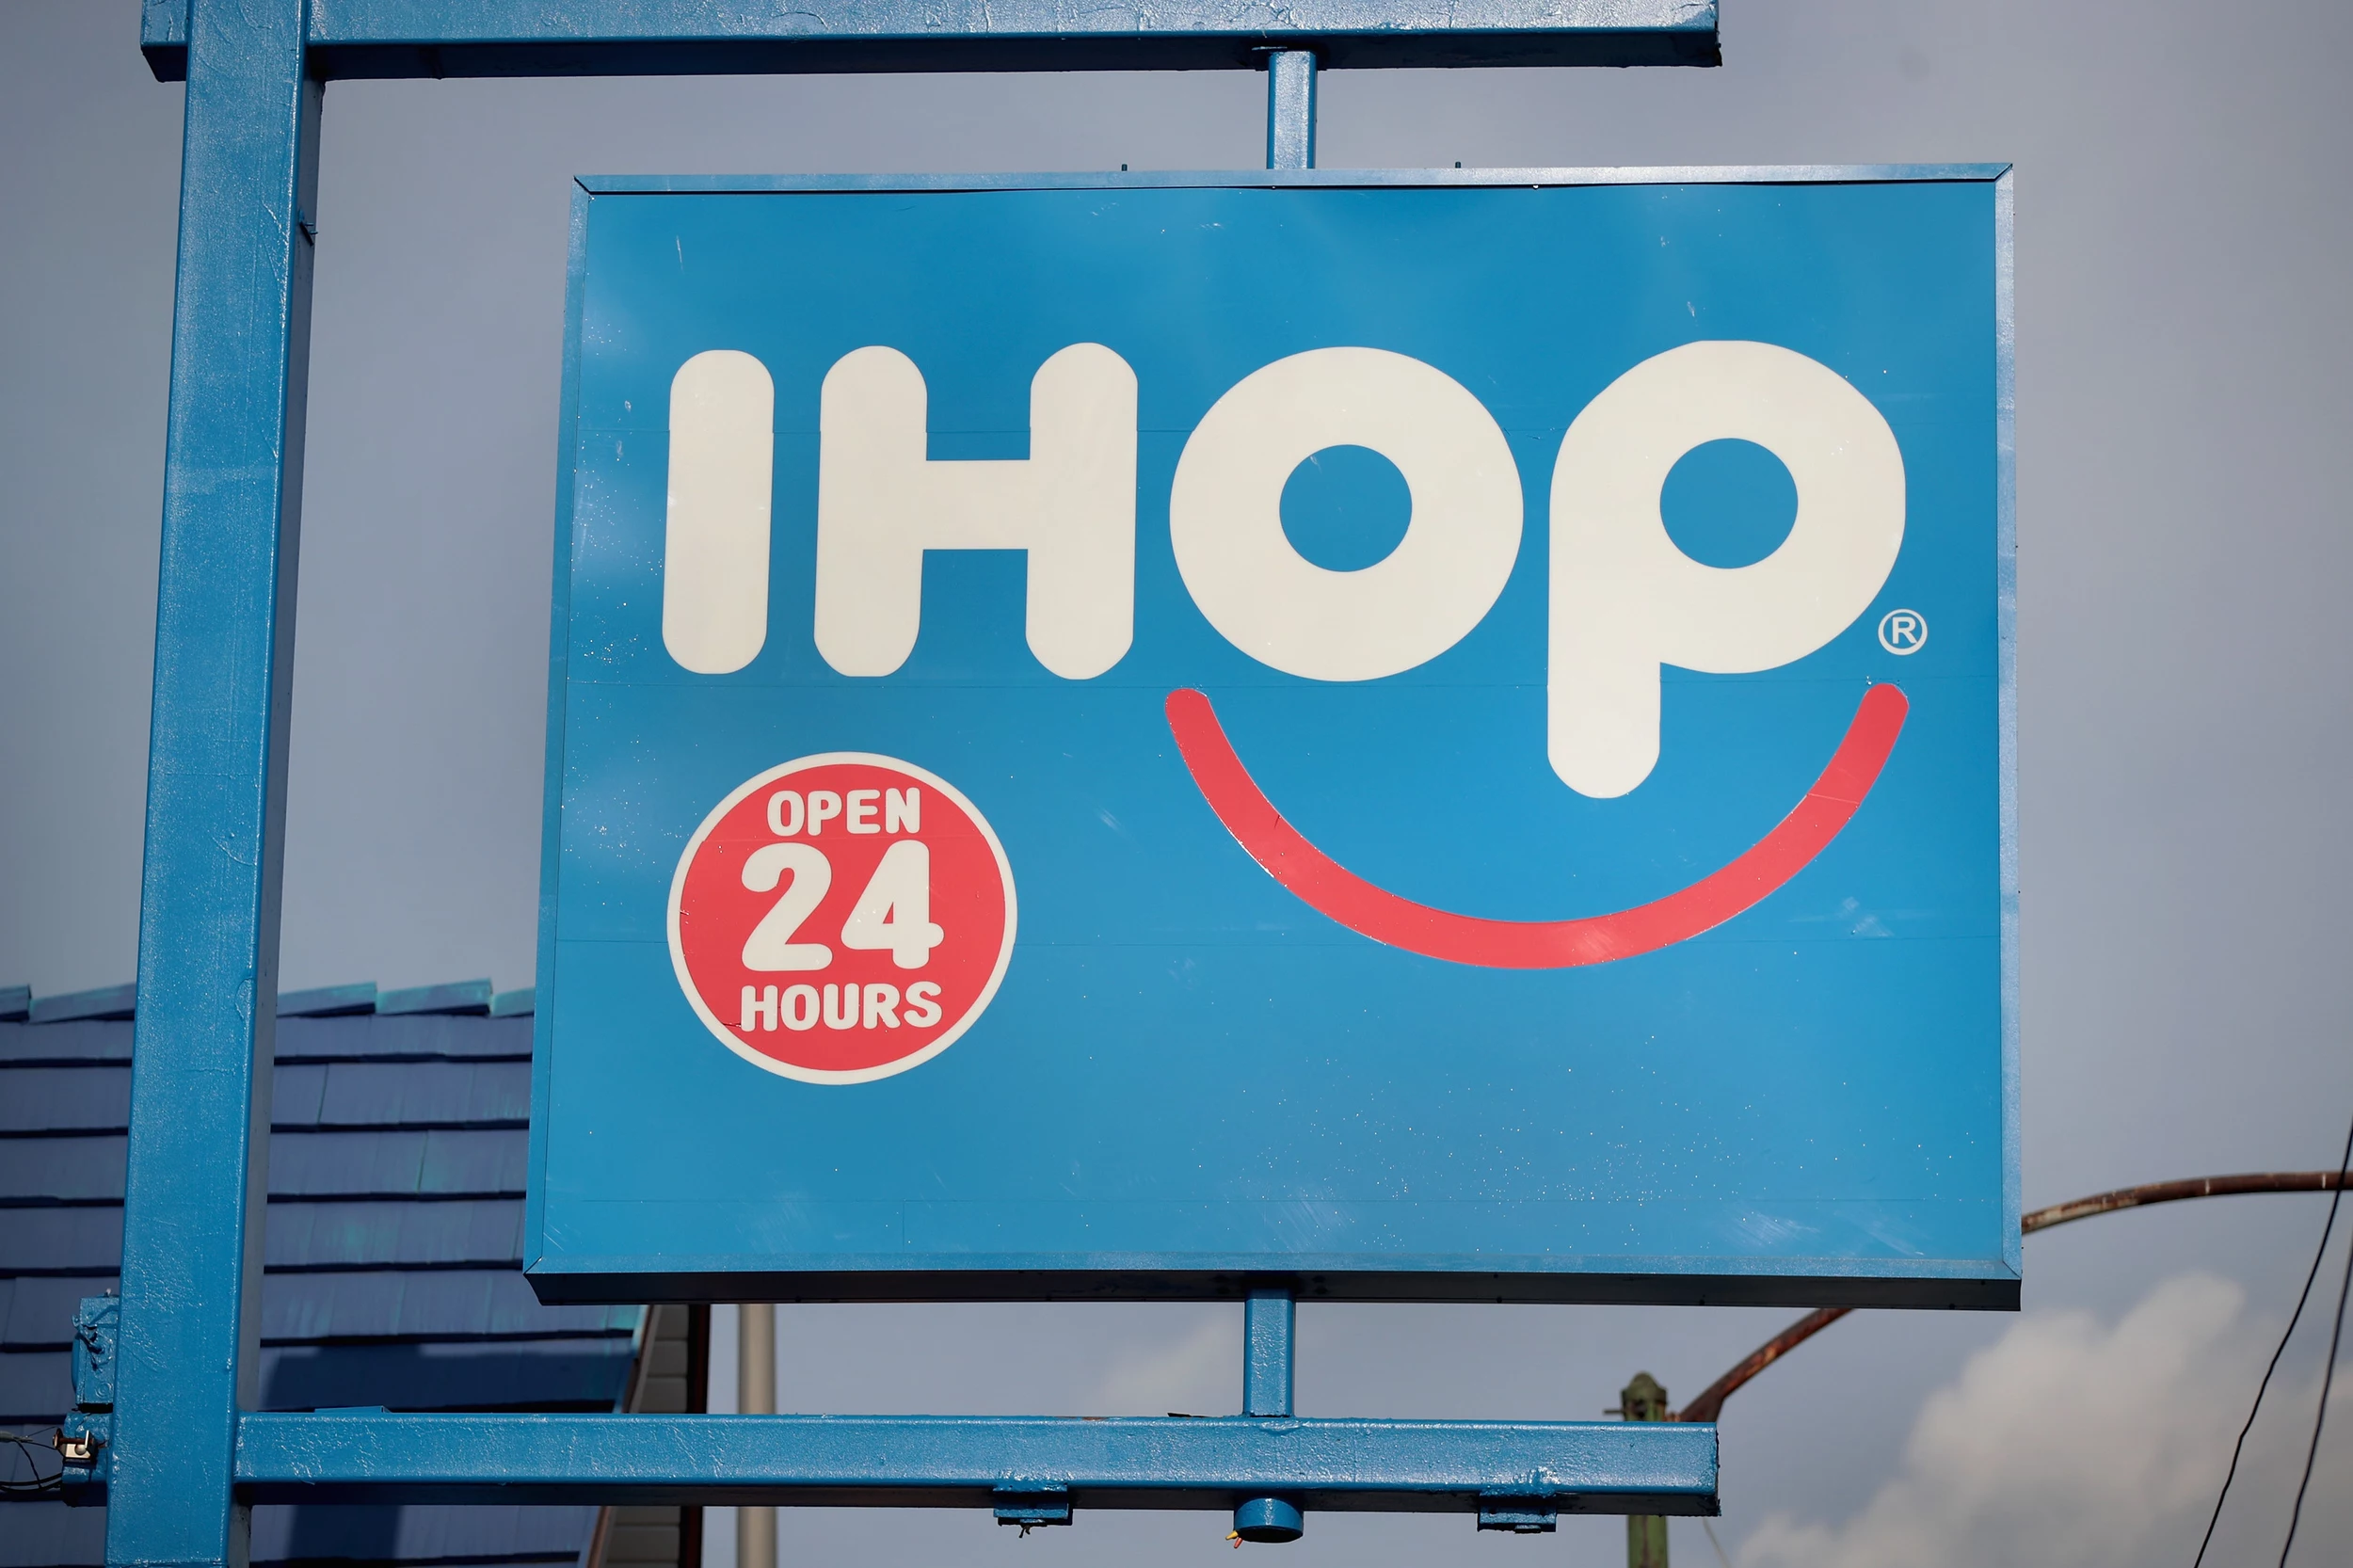 NRN video of the week: IHOP launches 'The Grinch'-inspired menu